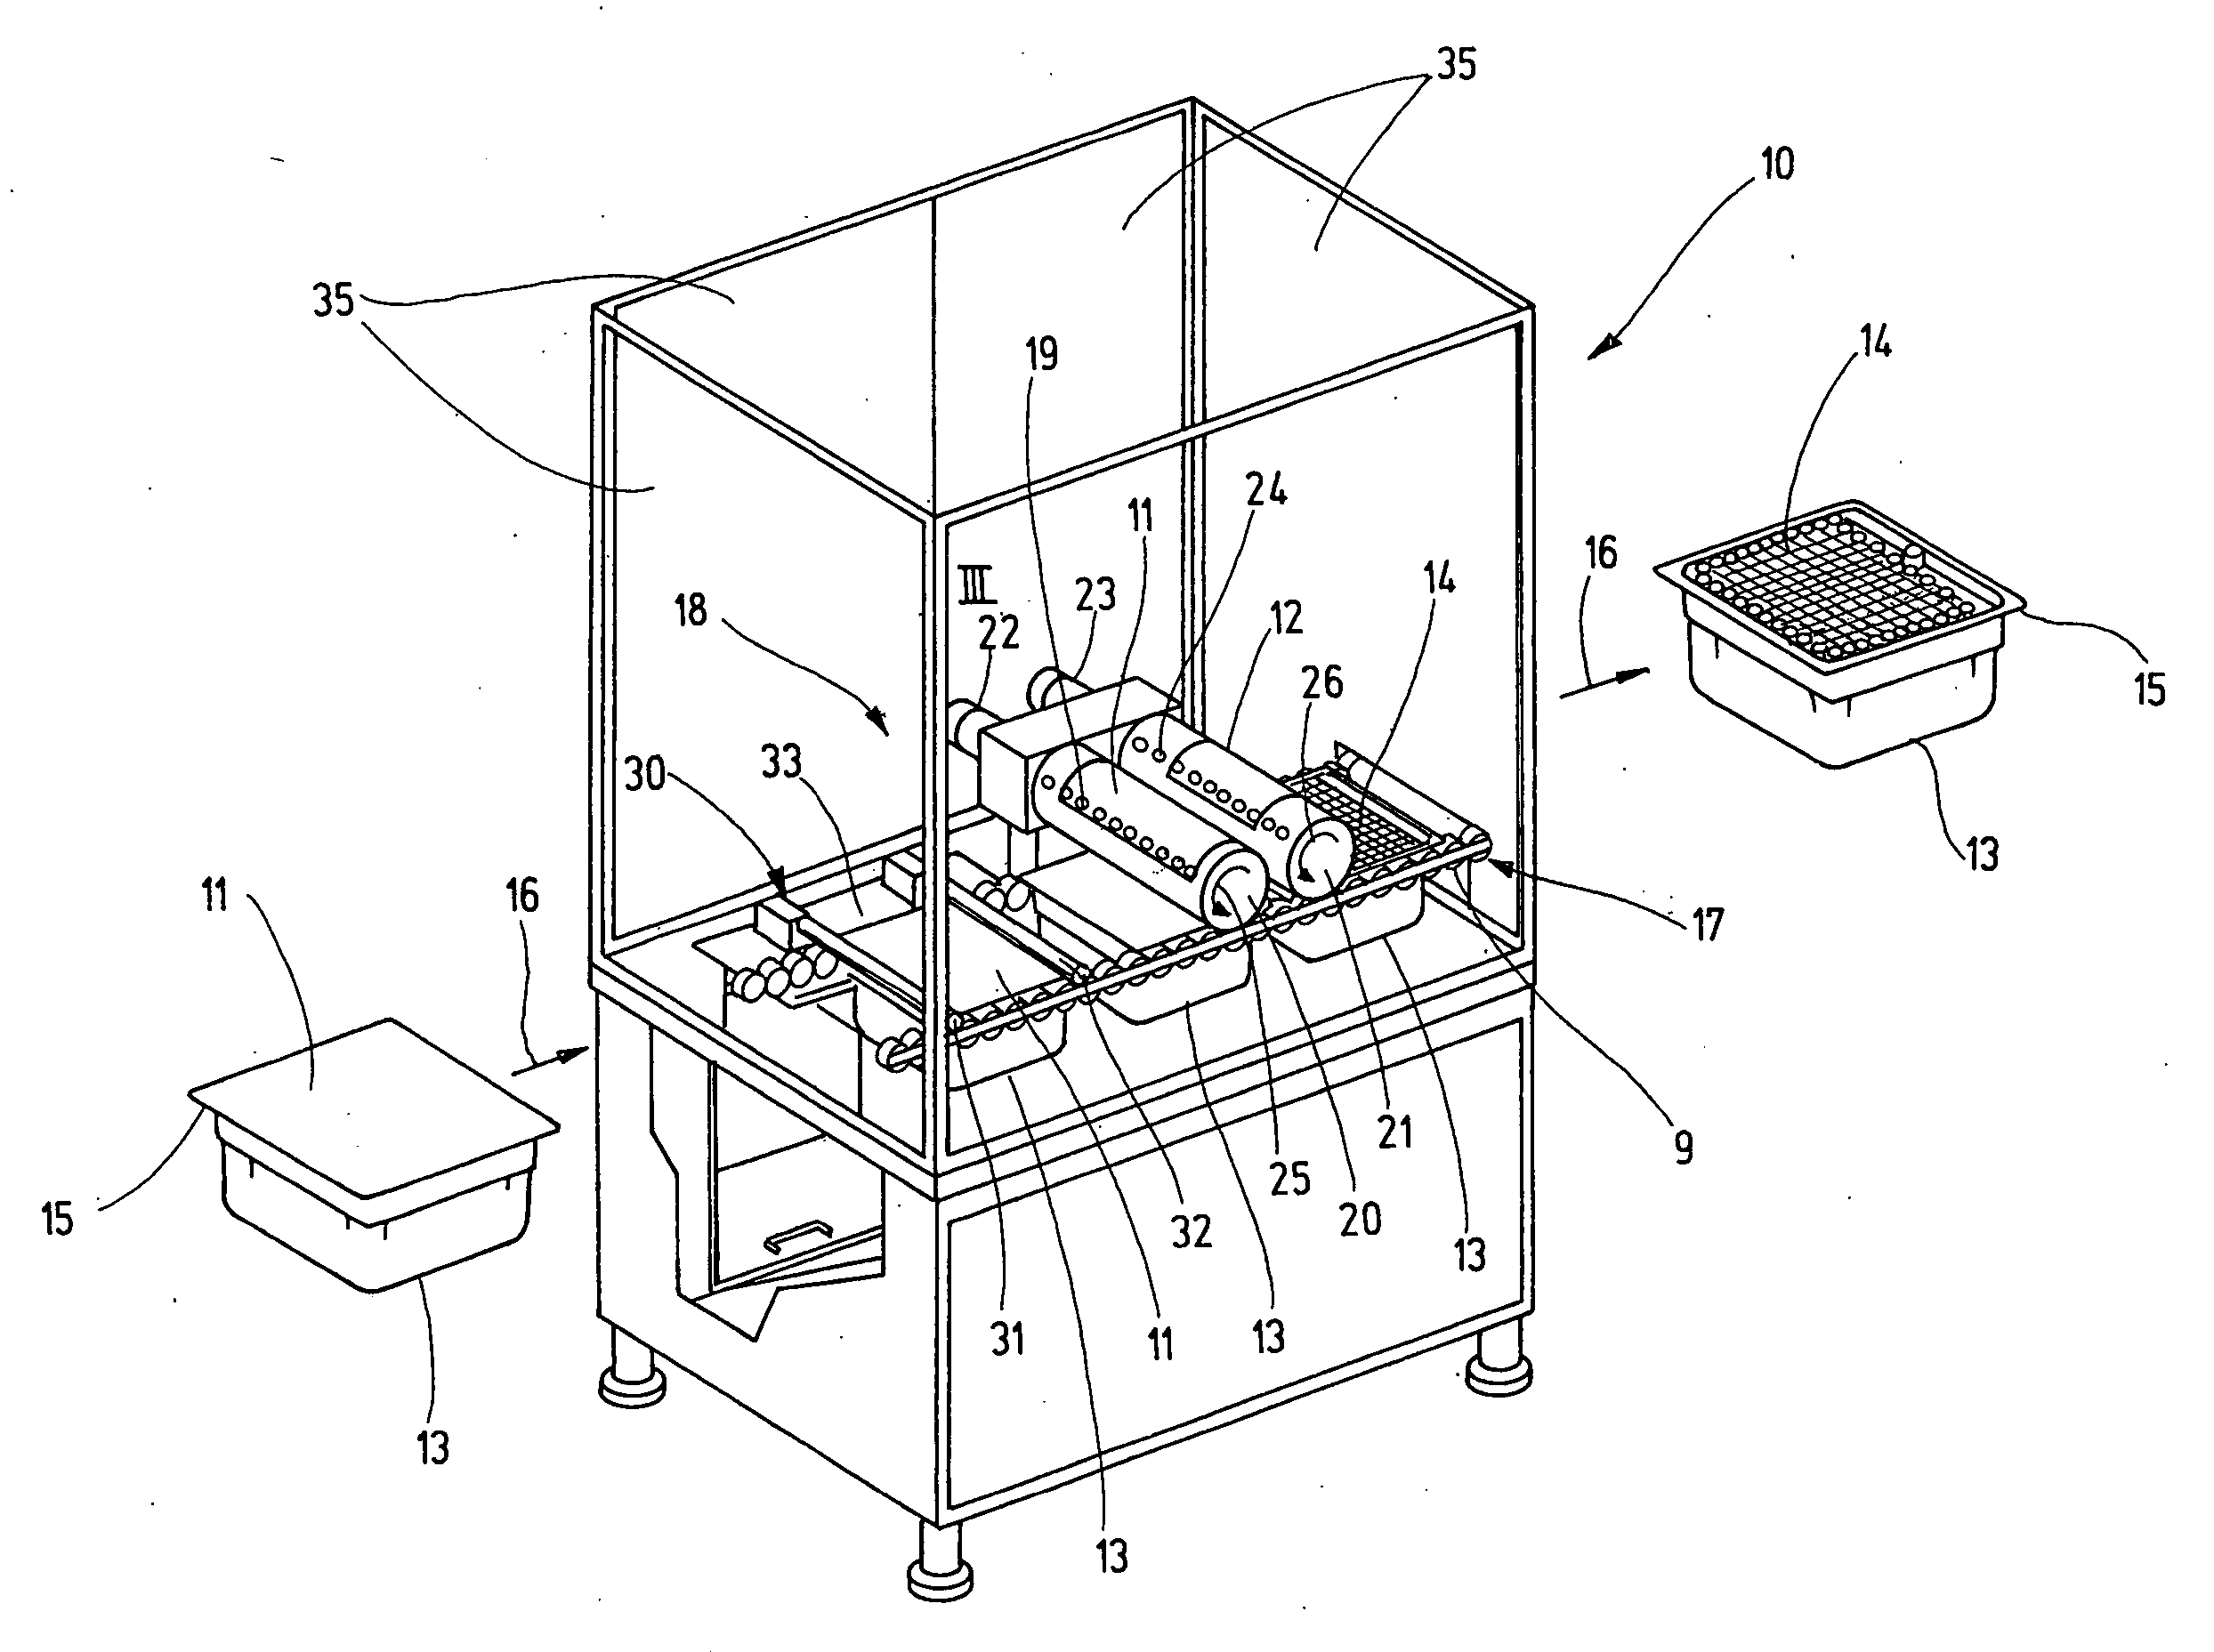 Method and device for removing a cover from a storage box